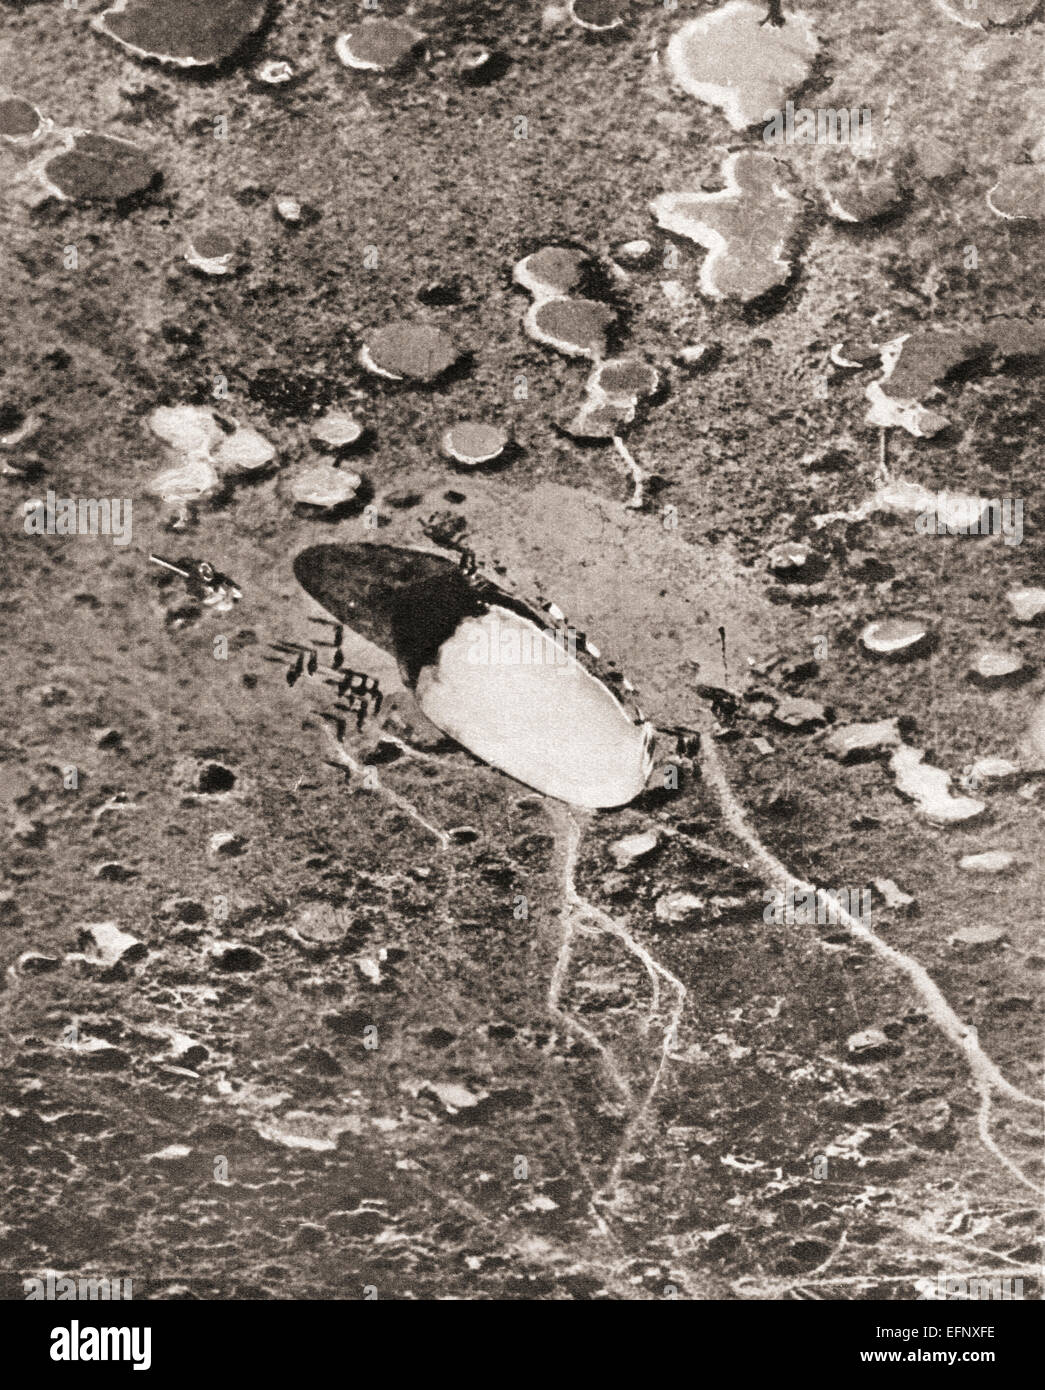 Aerial view of the capture of a war balloon on the western front during World War One. Stock Photo